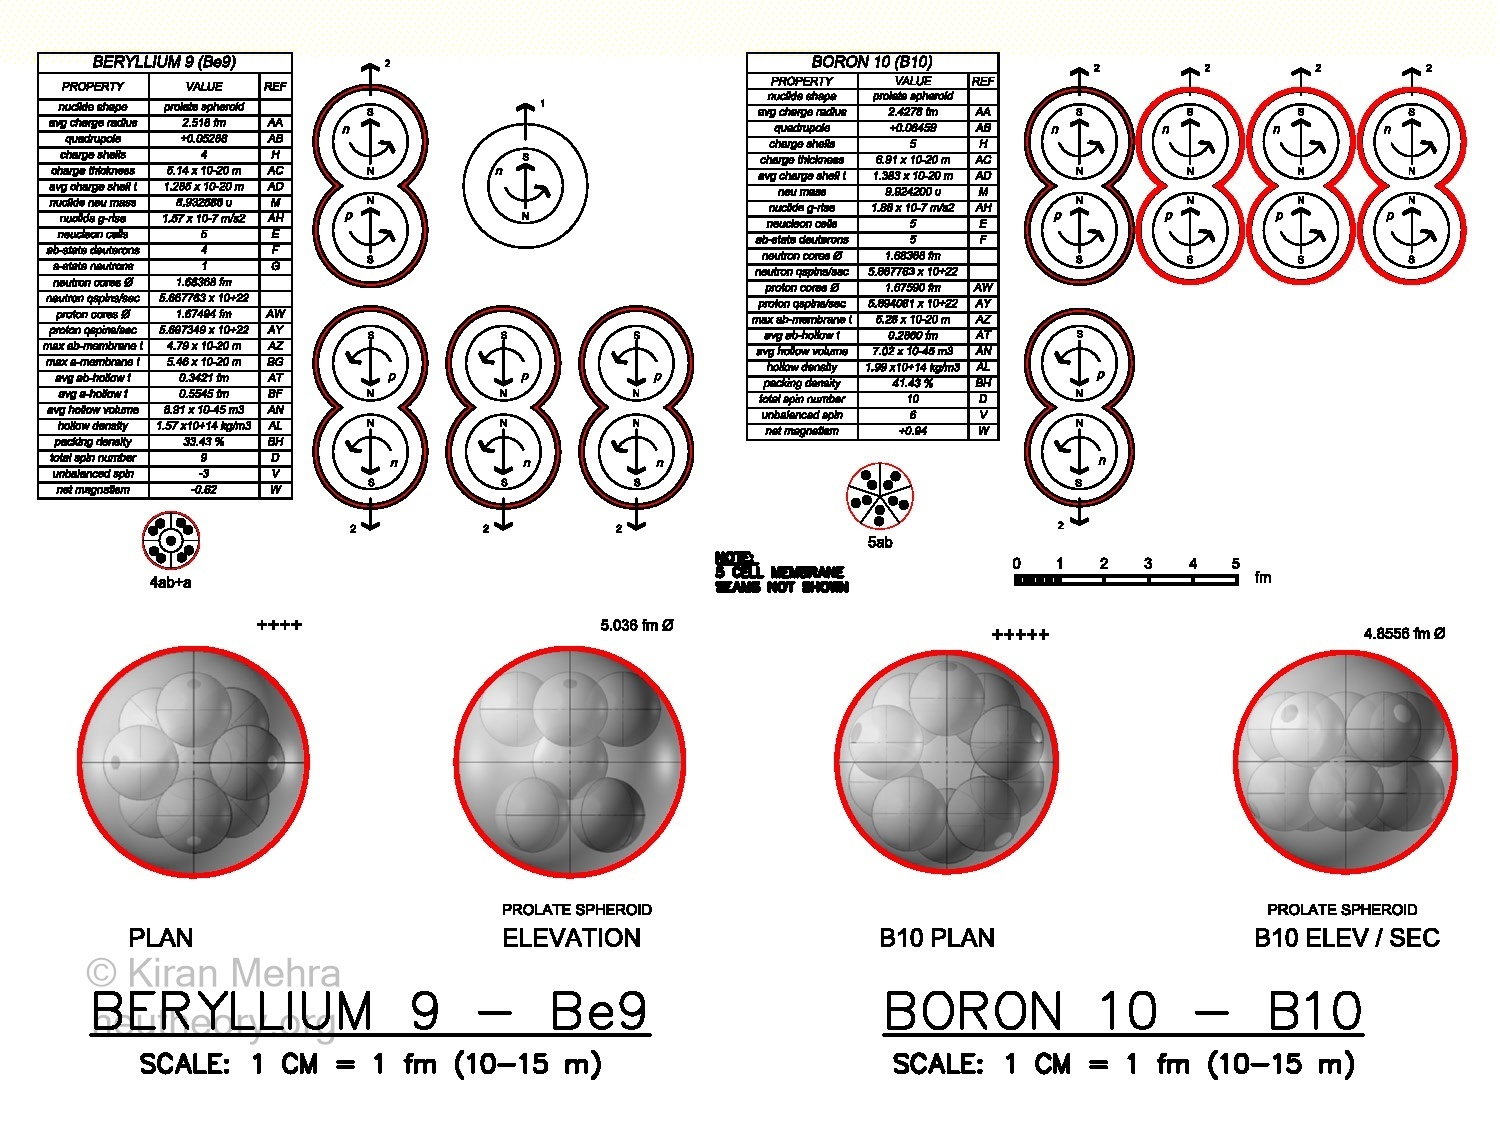 3D graphic images of deuteron and neutron cells clustering to form beryllium-9 and boron-10 nuclides